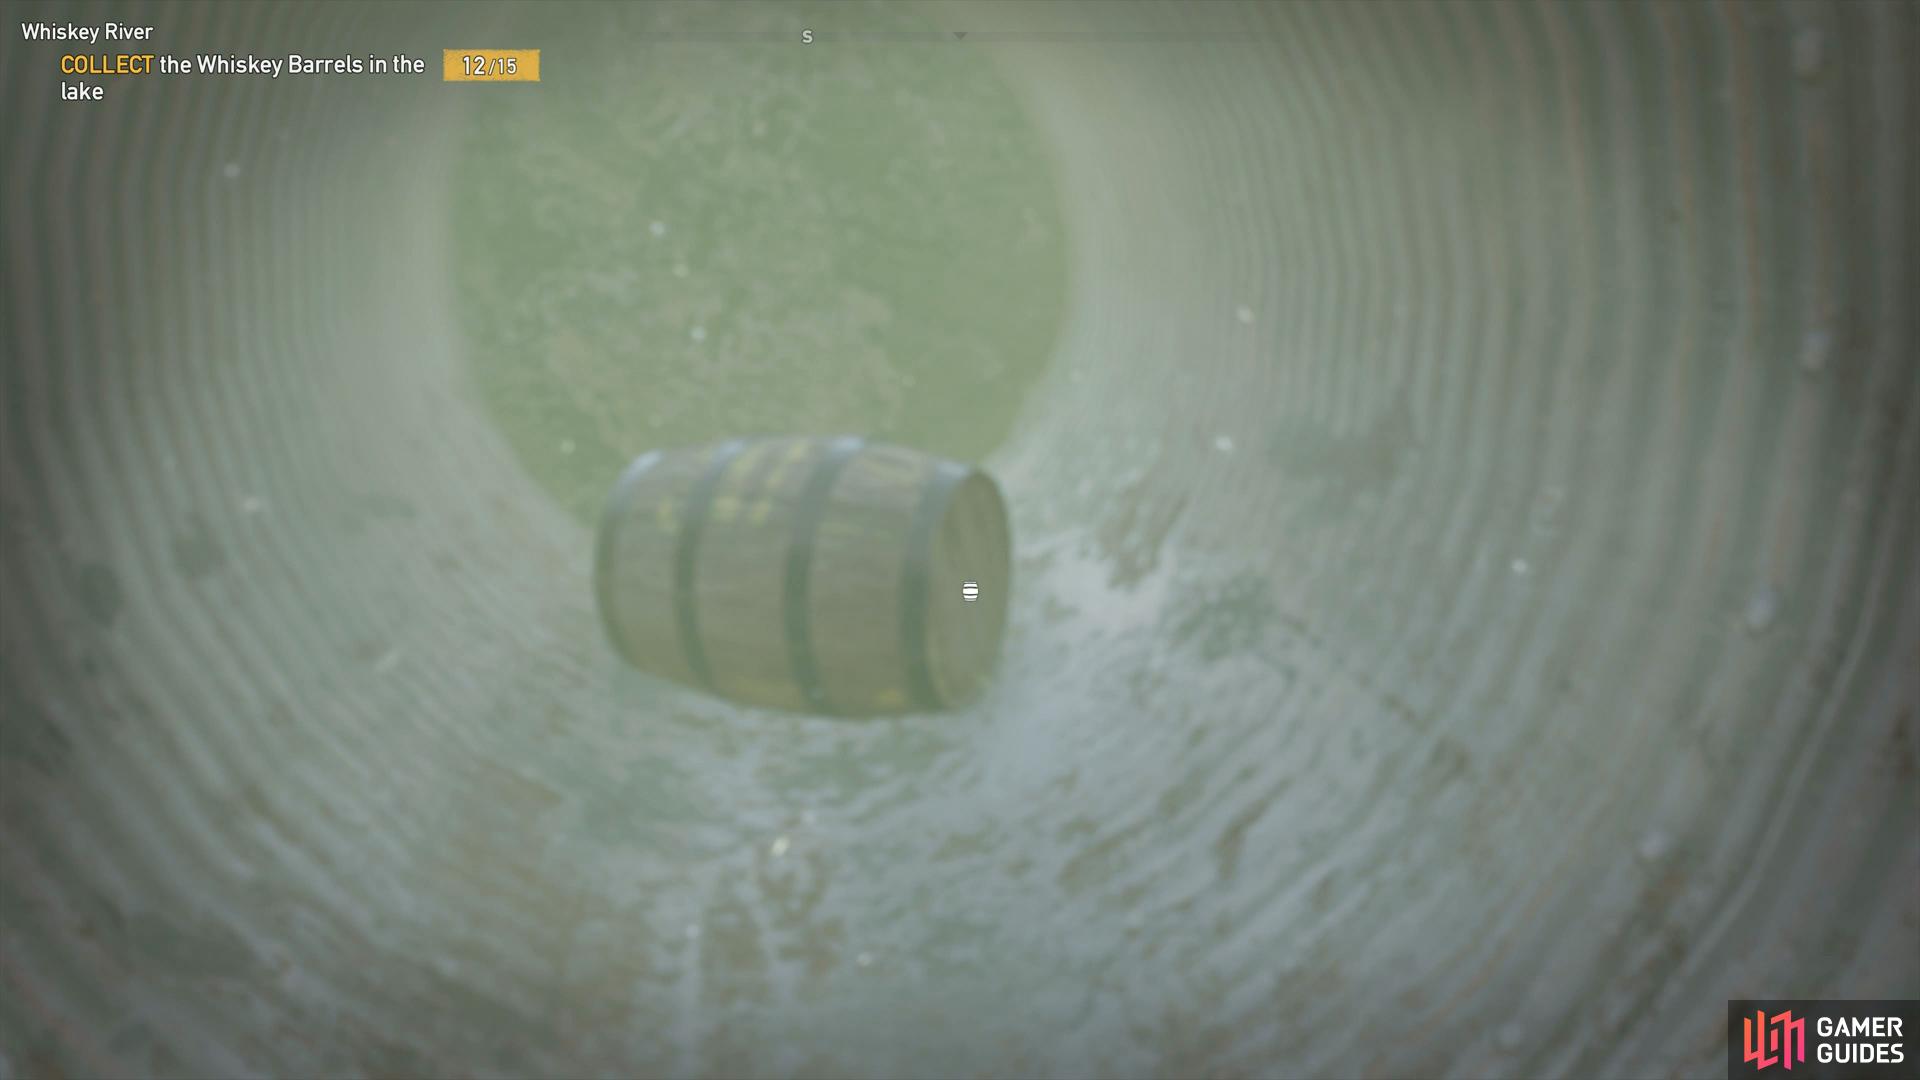 swim into the drainage pipe to find the barrel inside.